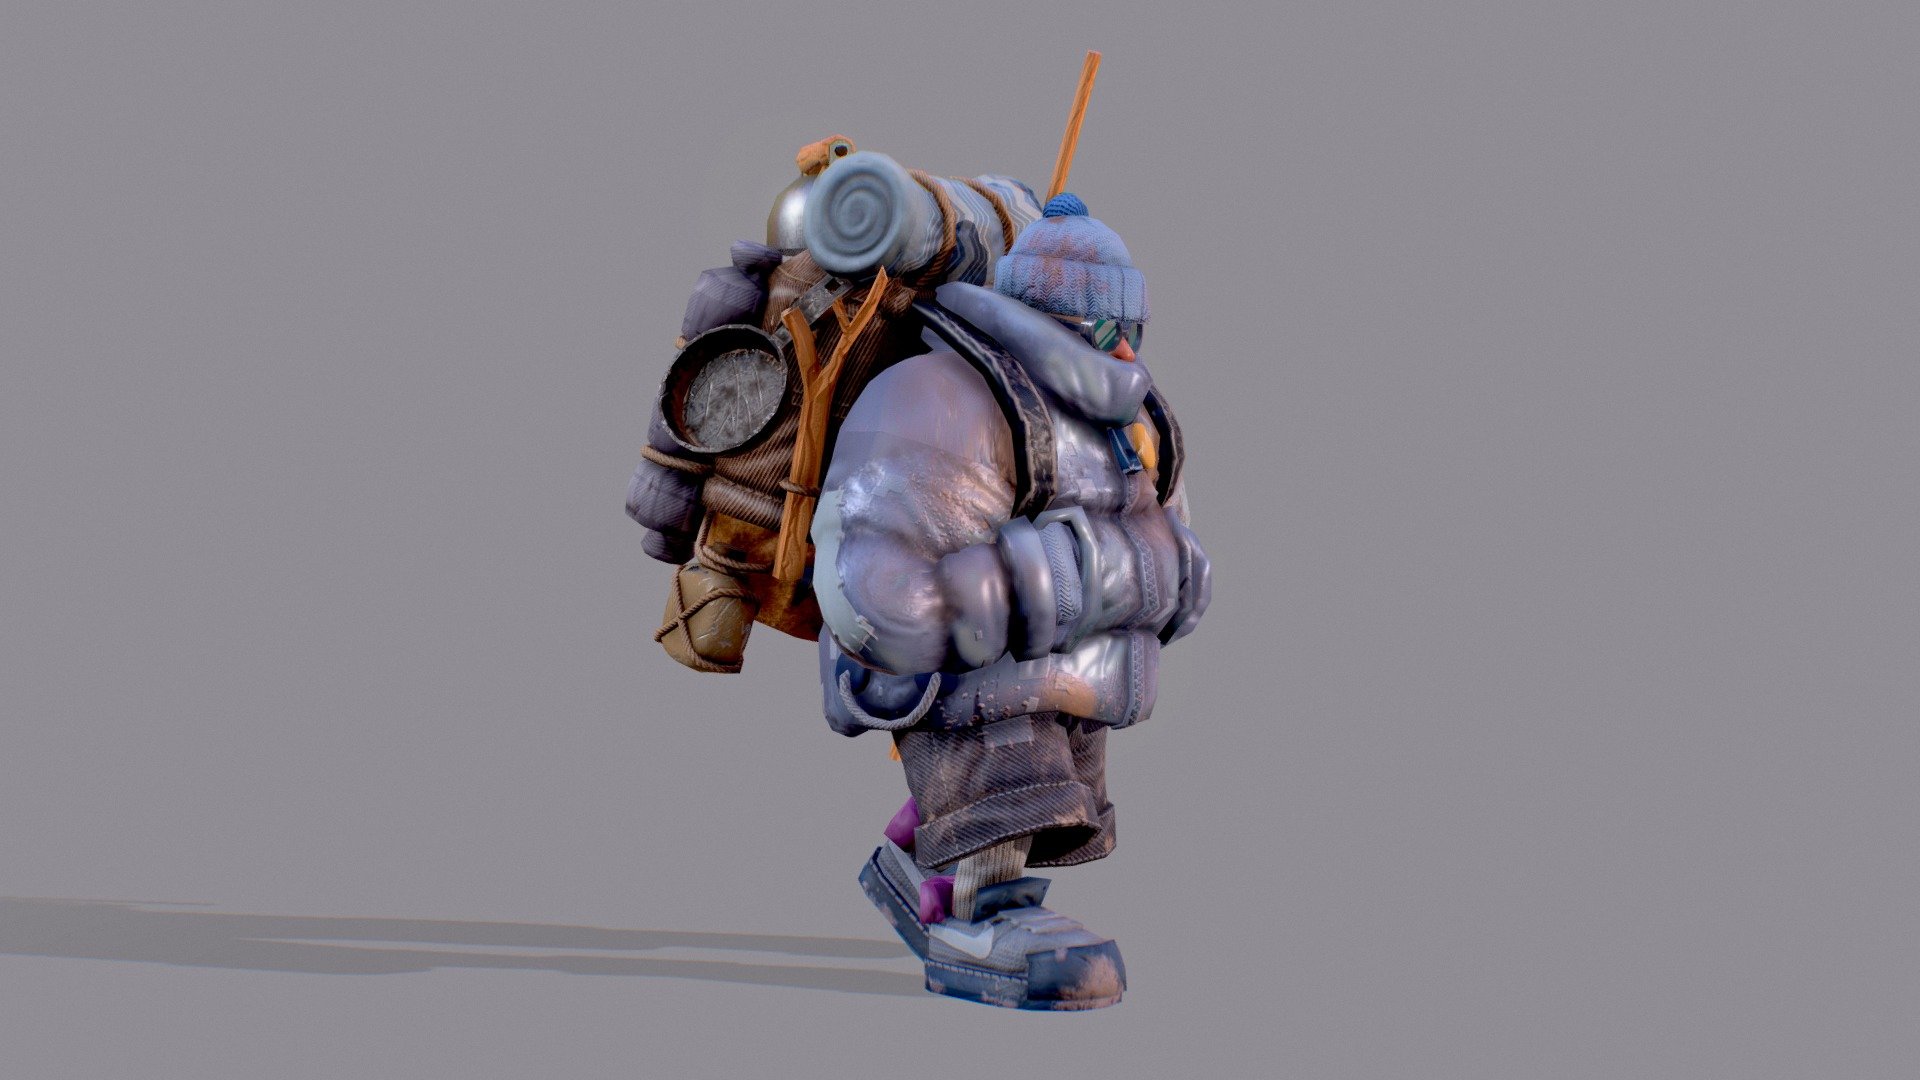 Personal work.
Studying PBR texturing, Rigging and Animation.
Concept by Gastón Pacheco 3d model